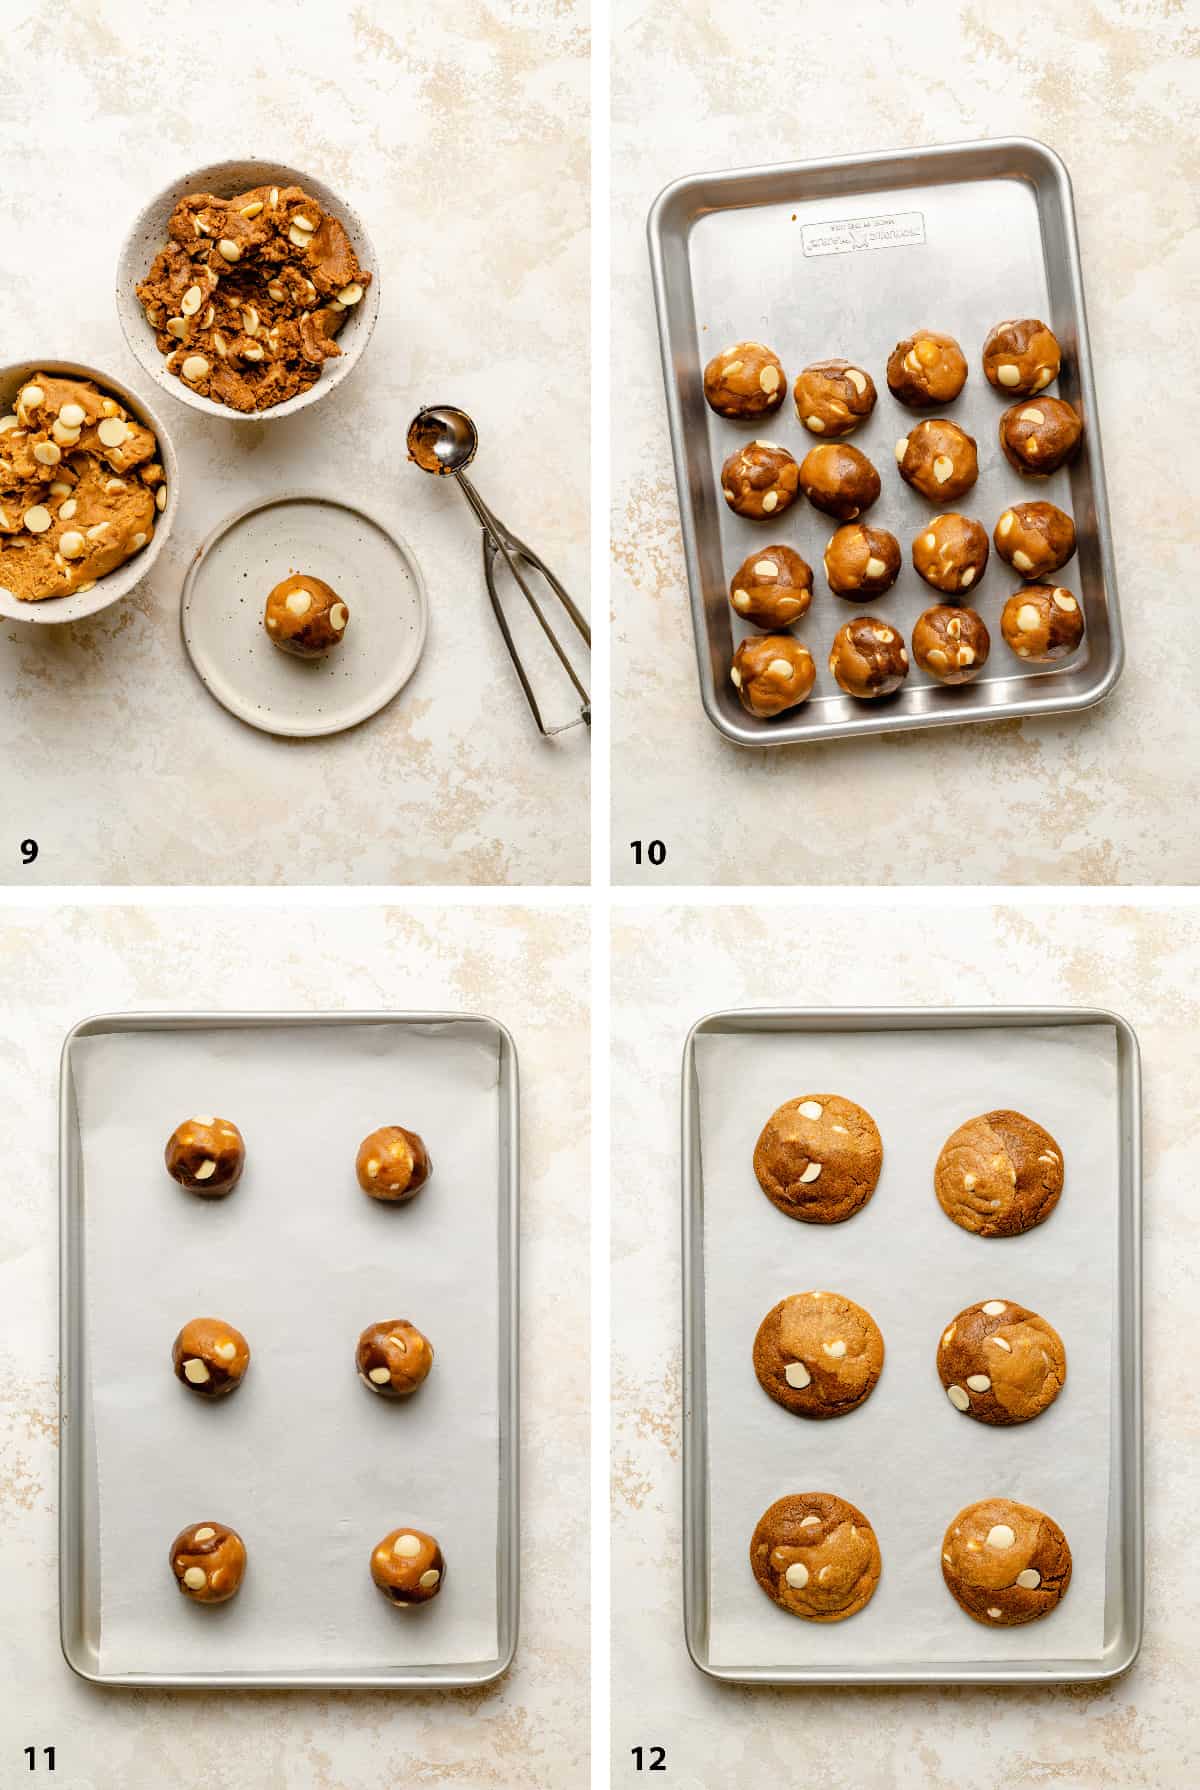 Process of scooping and making swirl cookies, cookie dough balls on a baking sheet and baked cookies.